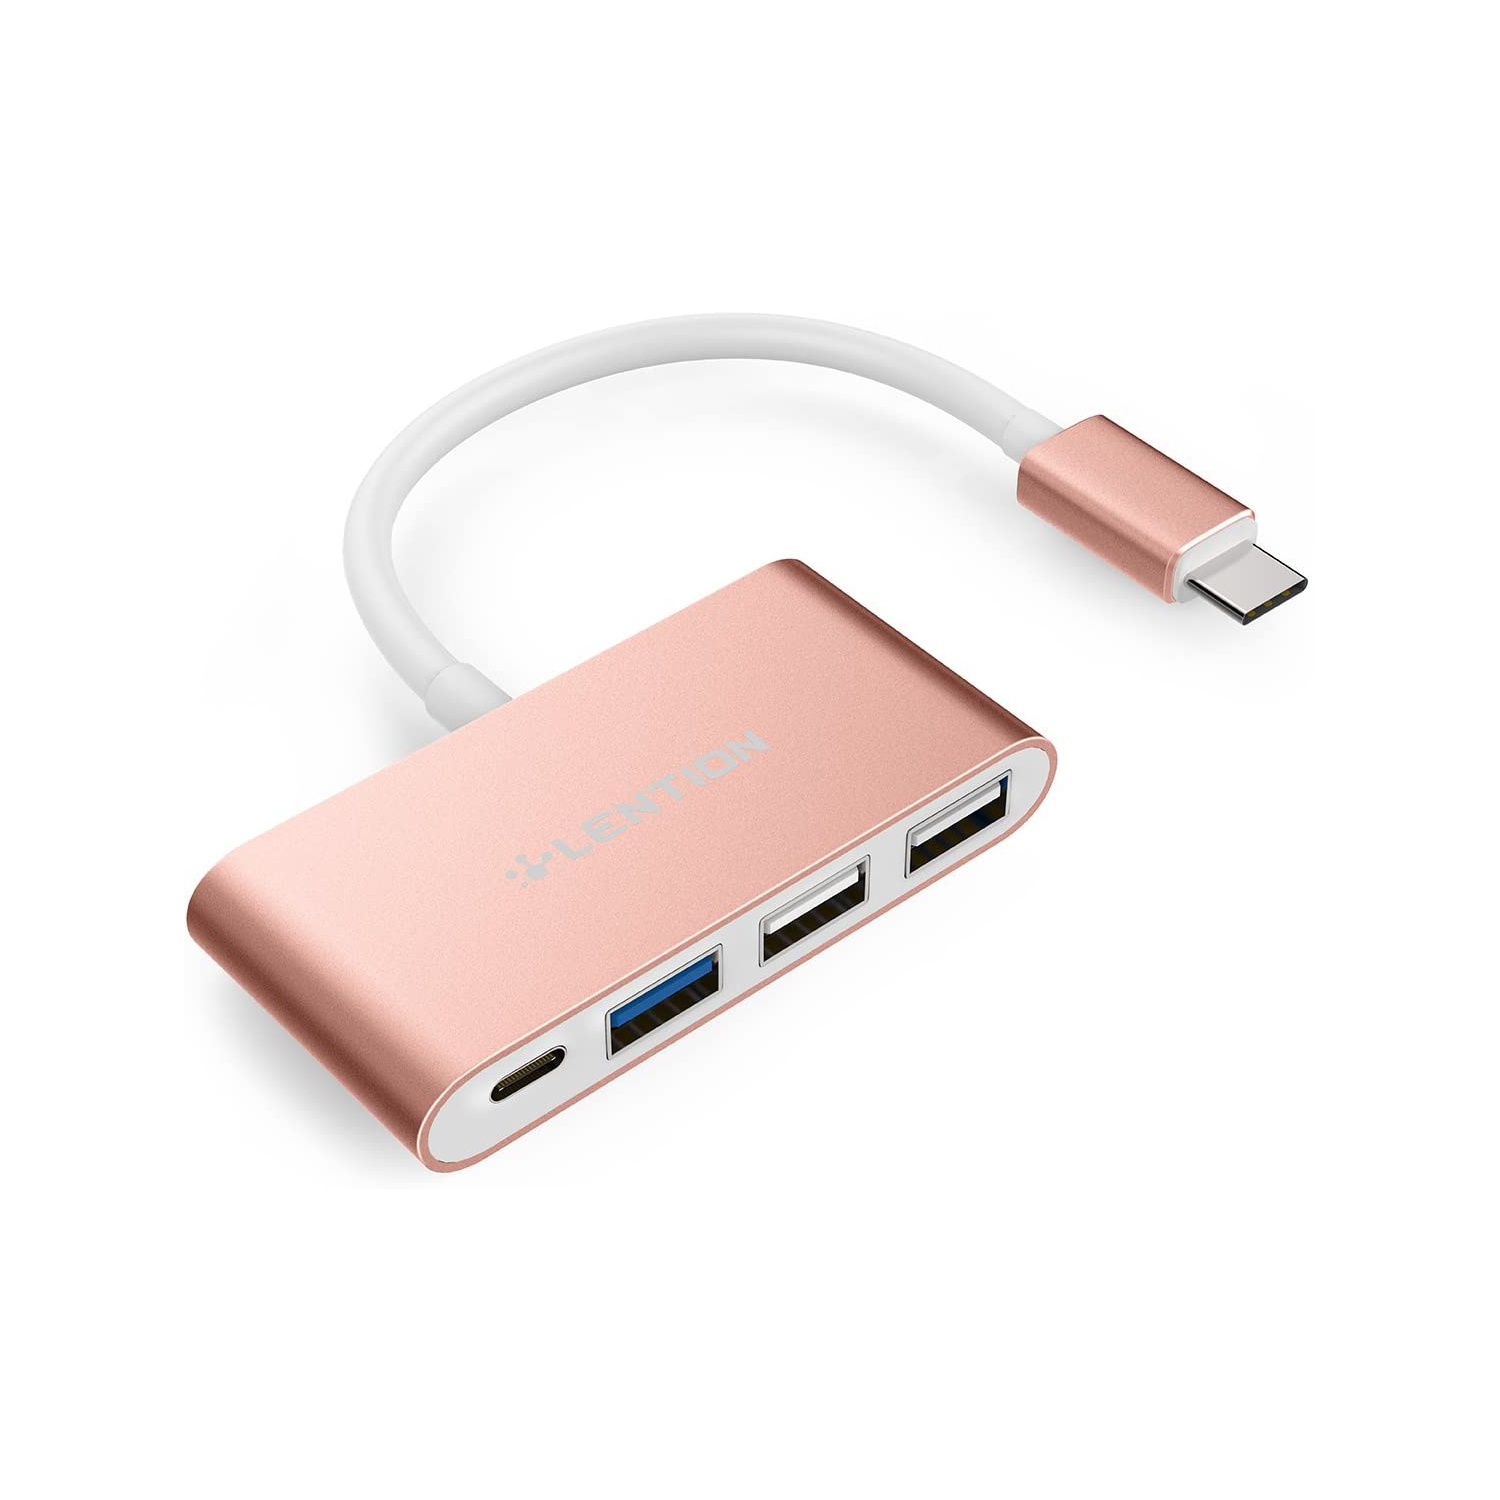 4-in-1 USB-C Hub with Type C, USB 3.0, USB 2.0, Compatible 2020-2016 MacBook Pro 13/15/16, New Mac Air/Surface,